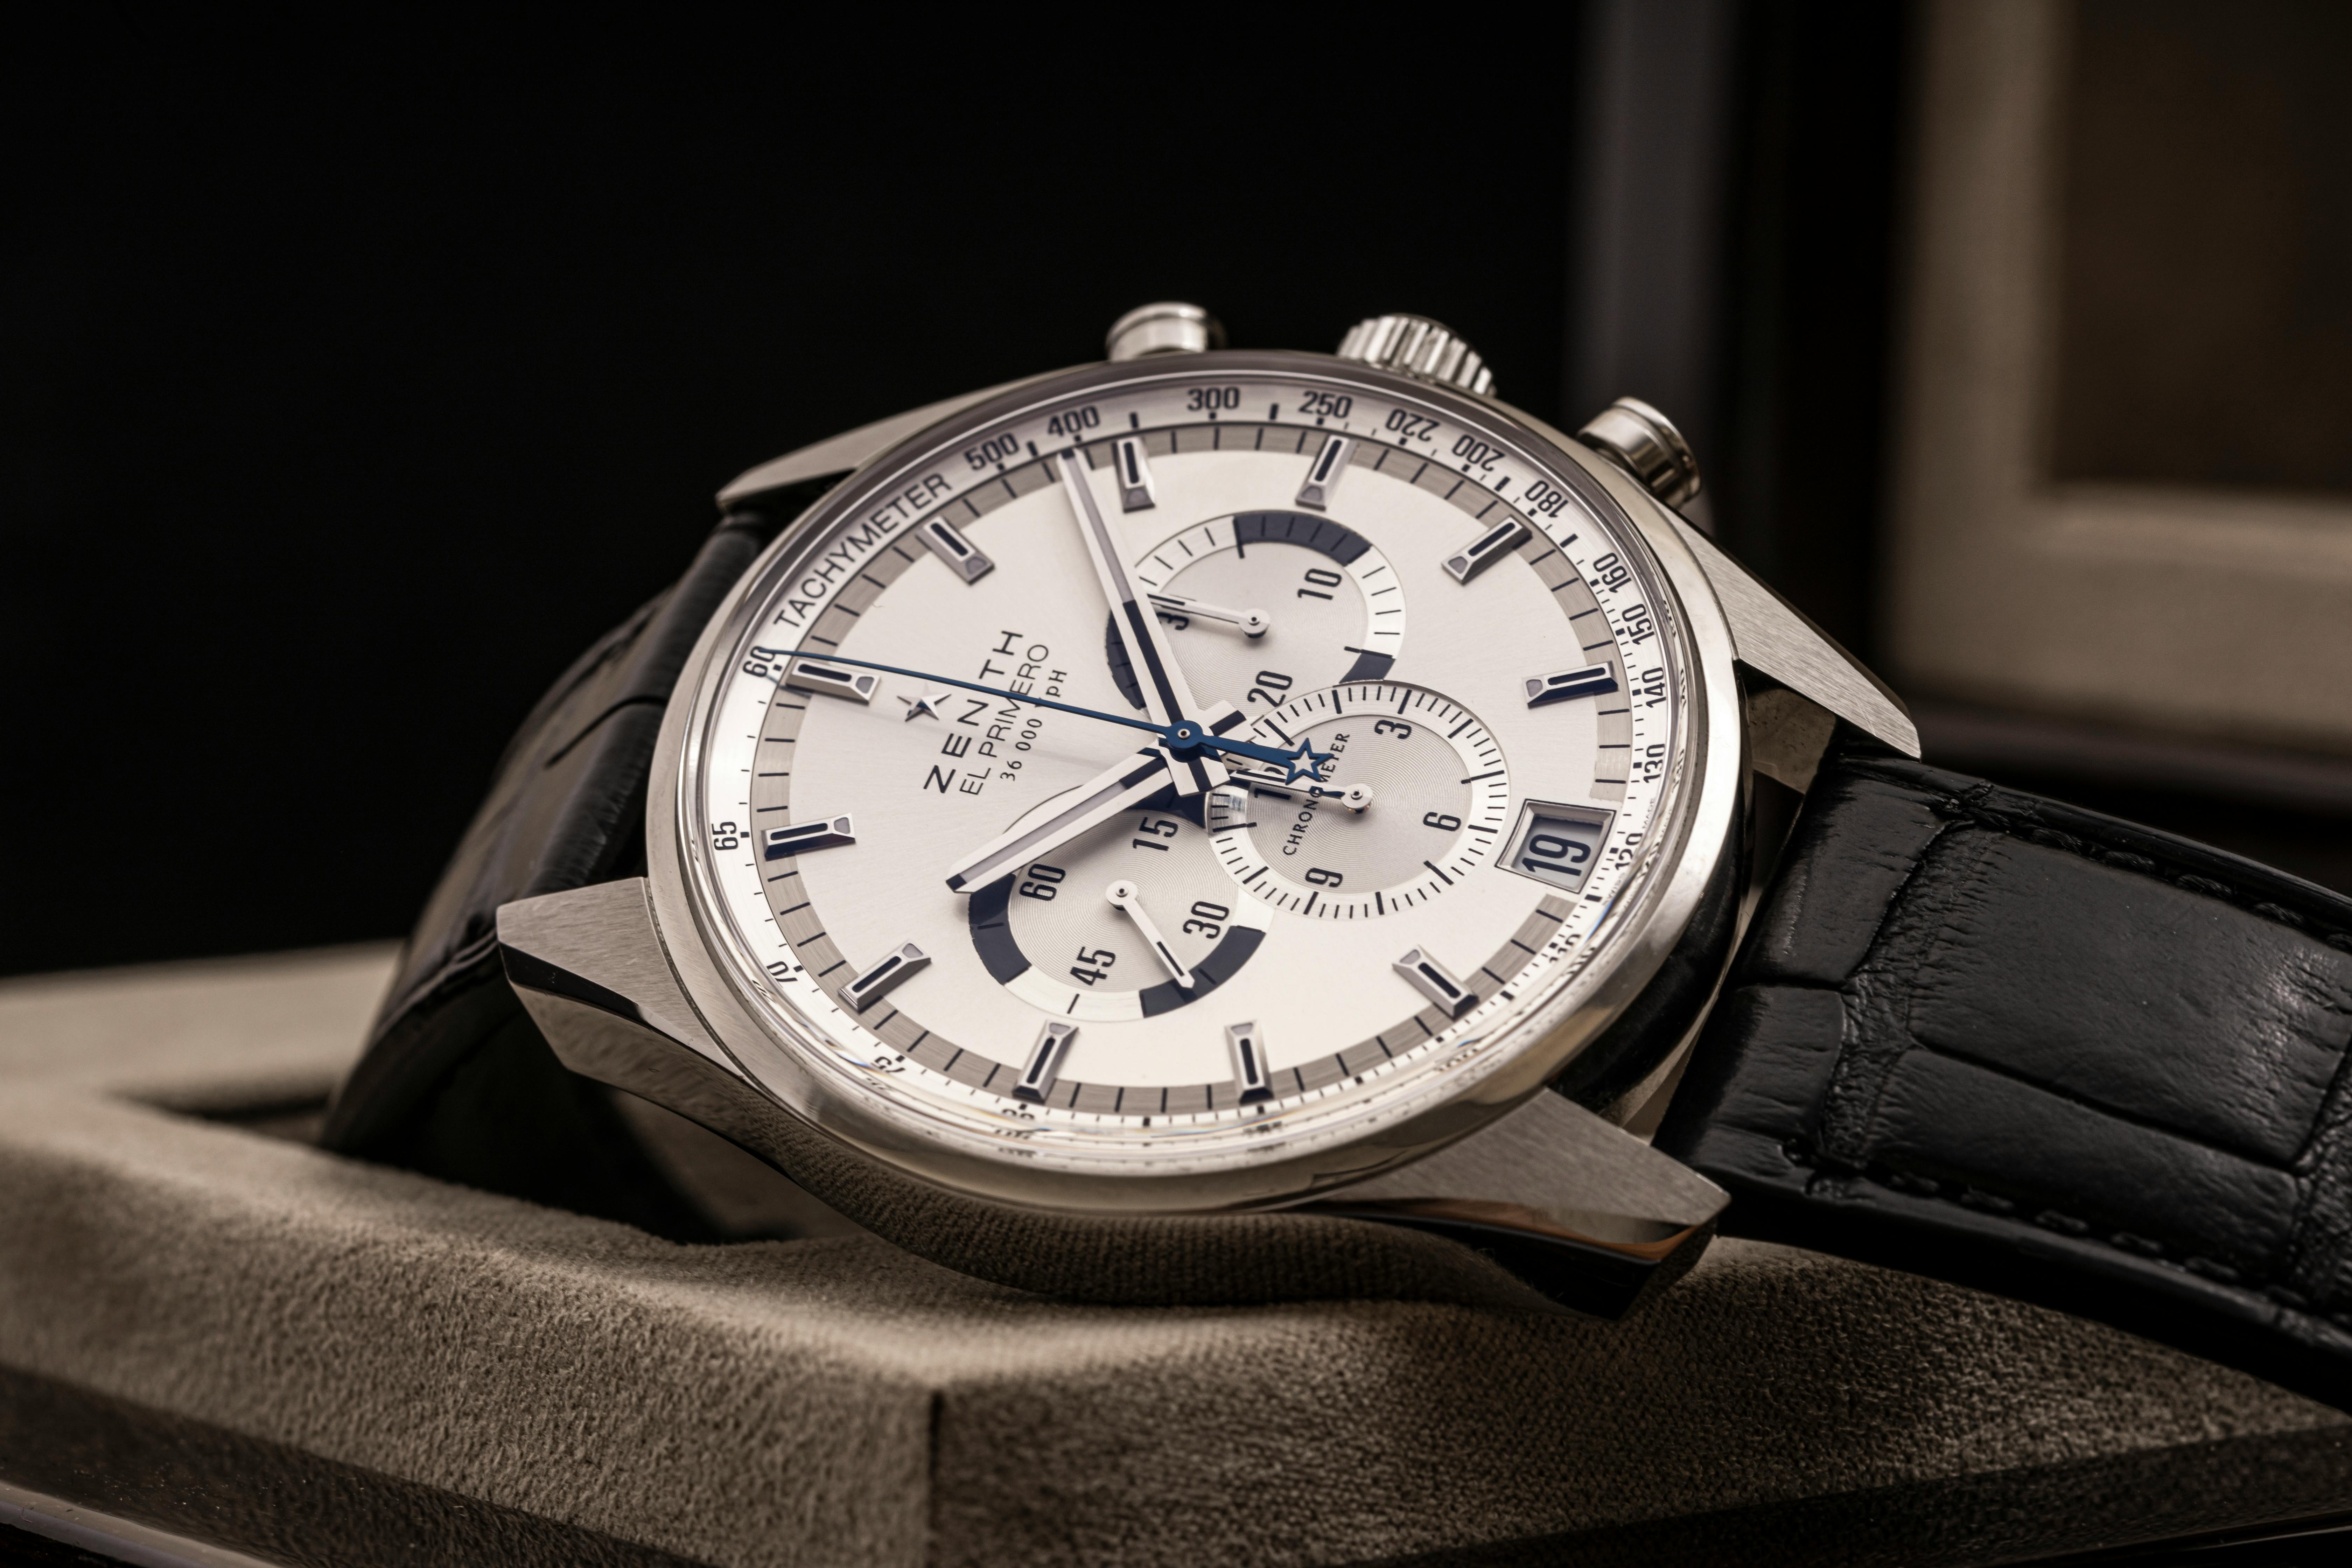 Zenith El Primero 36'000 VpH for $8,037 for sale from a Private